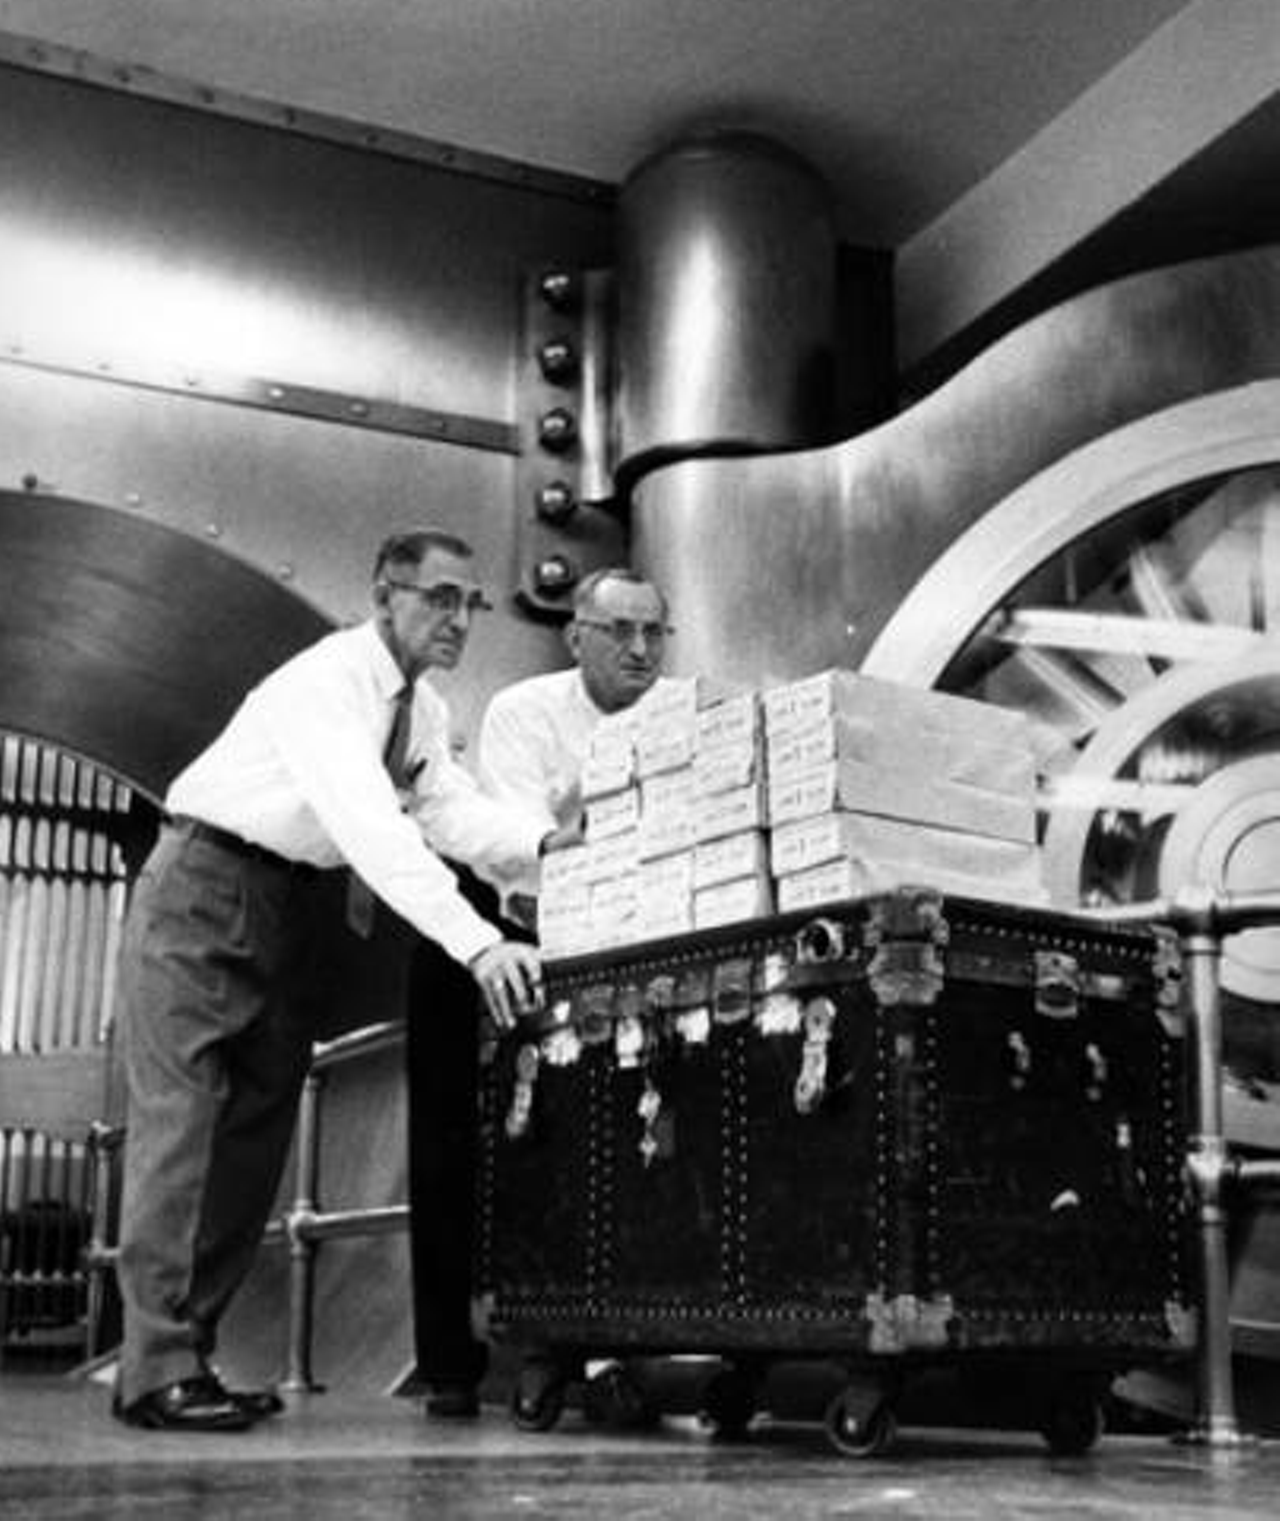 Two bank employees are seen wheeling a trunk into the vault, 1959.